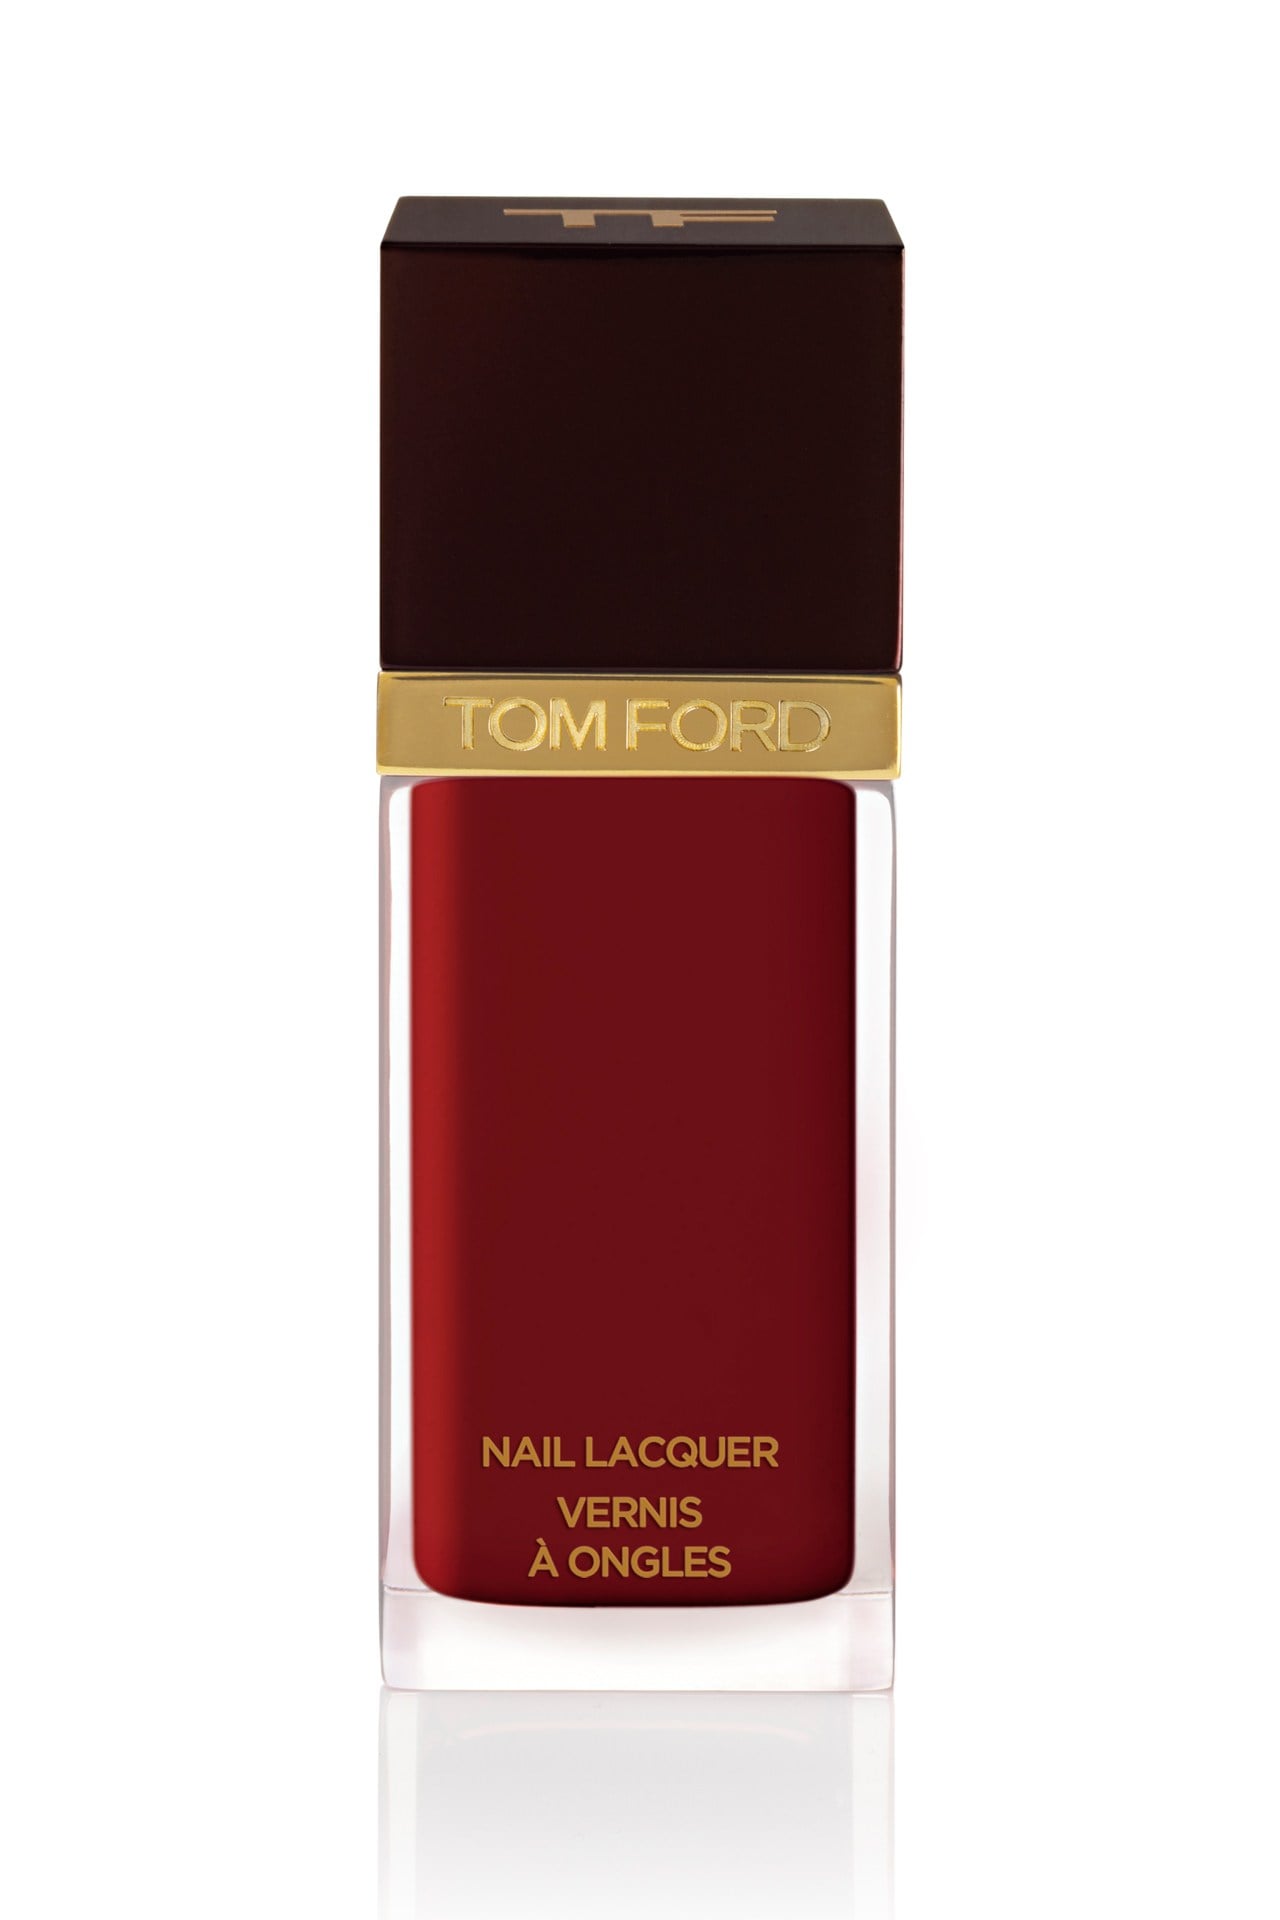 Tom Ford Nail Lacquer in Smoke Red | These Are the Shades of Red Polish  That Are Everywhere This Fall | POPSUGAR Beauty Photo 16